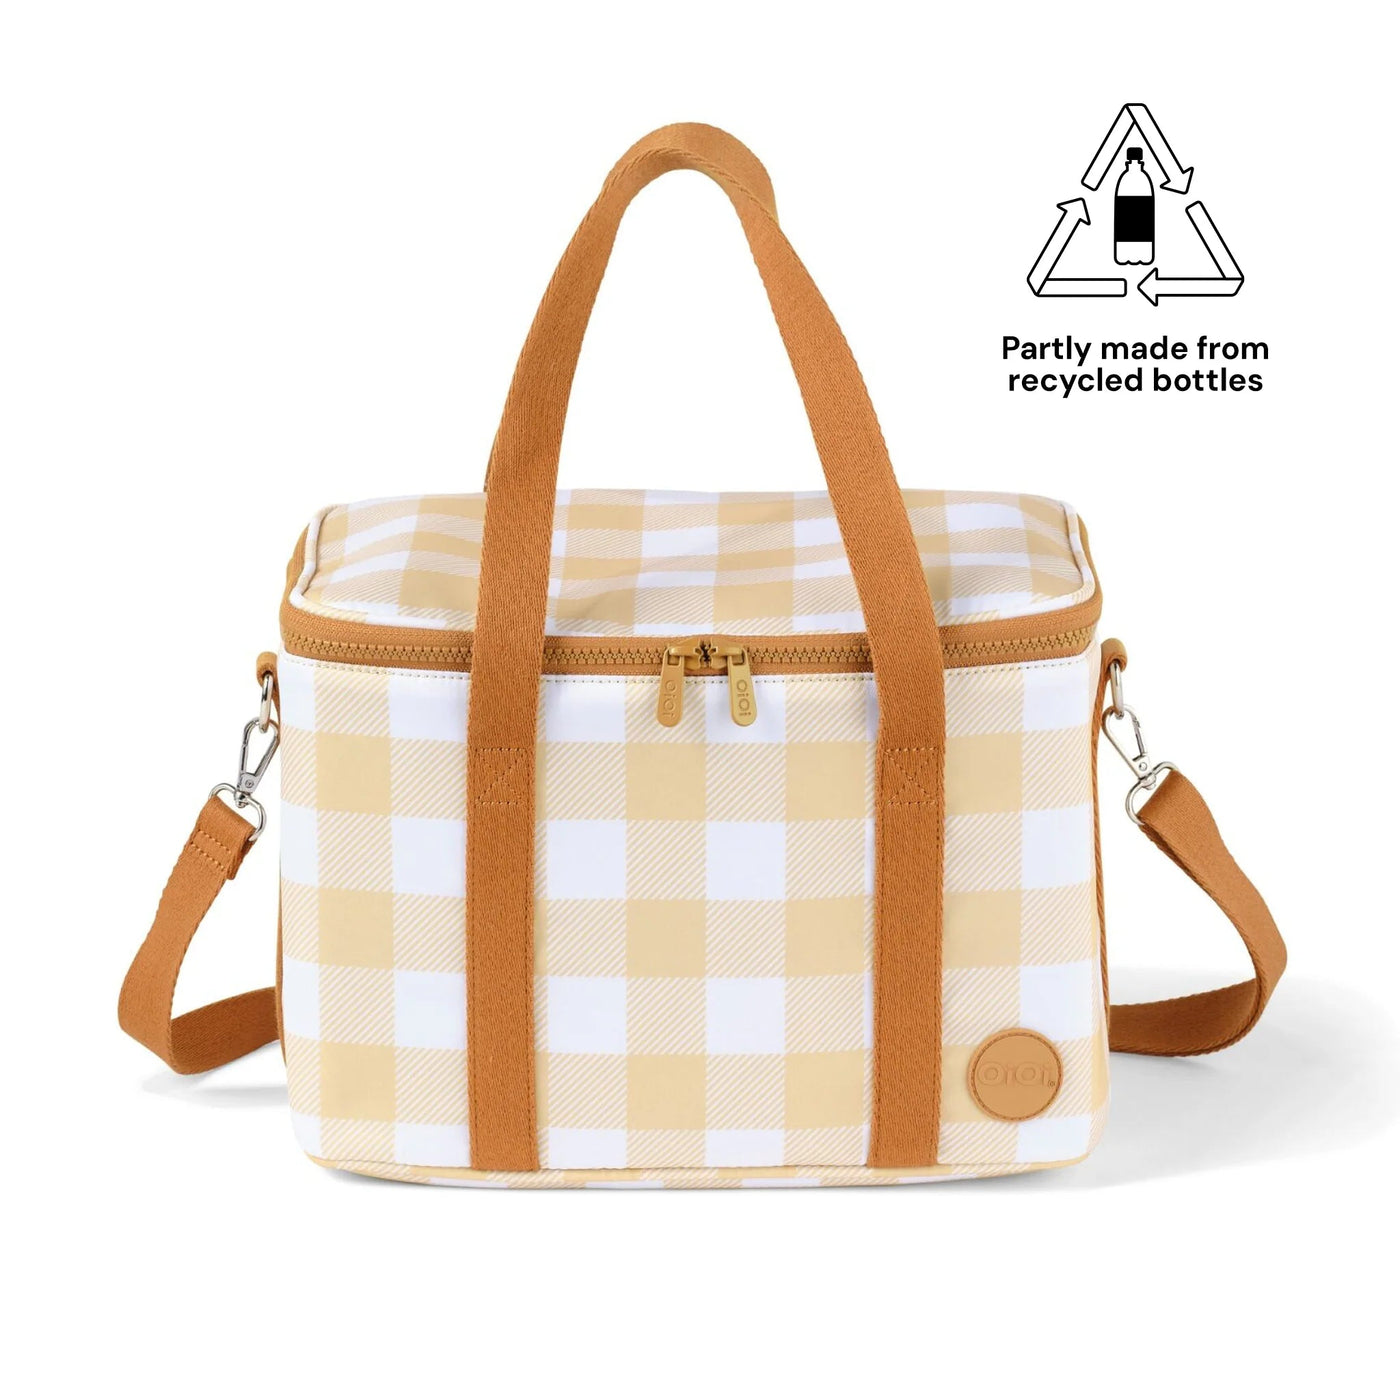 OiOi Maxi Insulated Lunch Bag - Beige Gingham Mealtime OiOi 